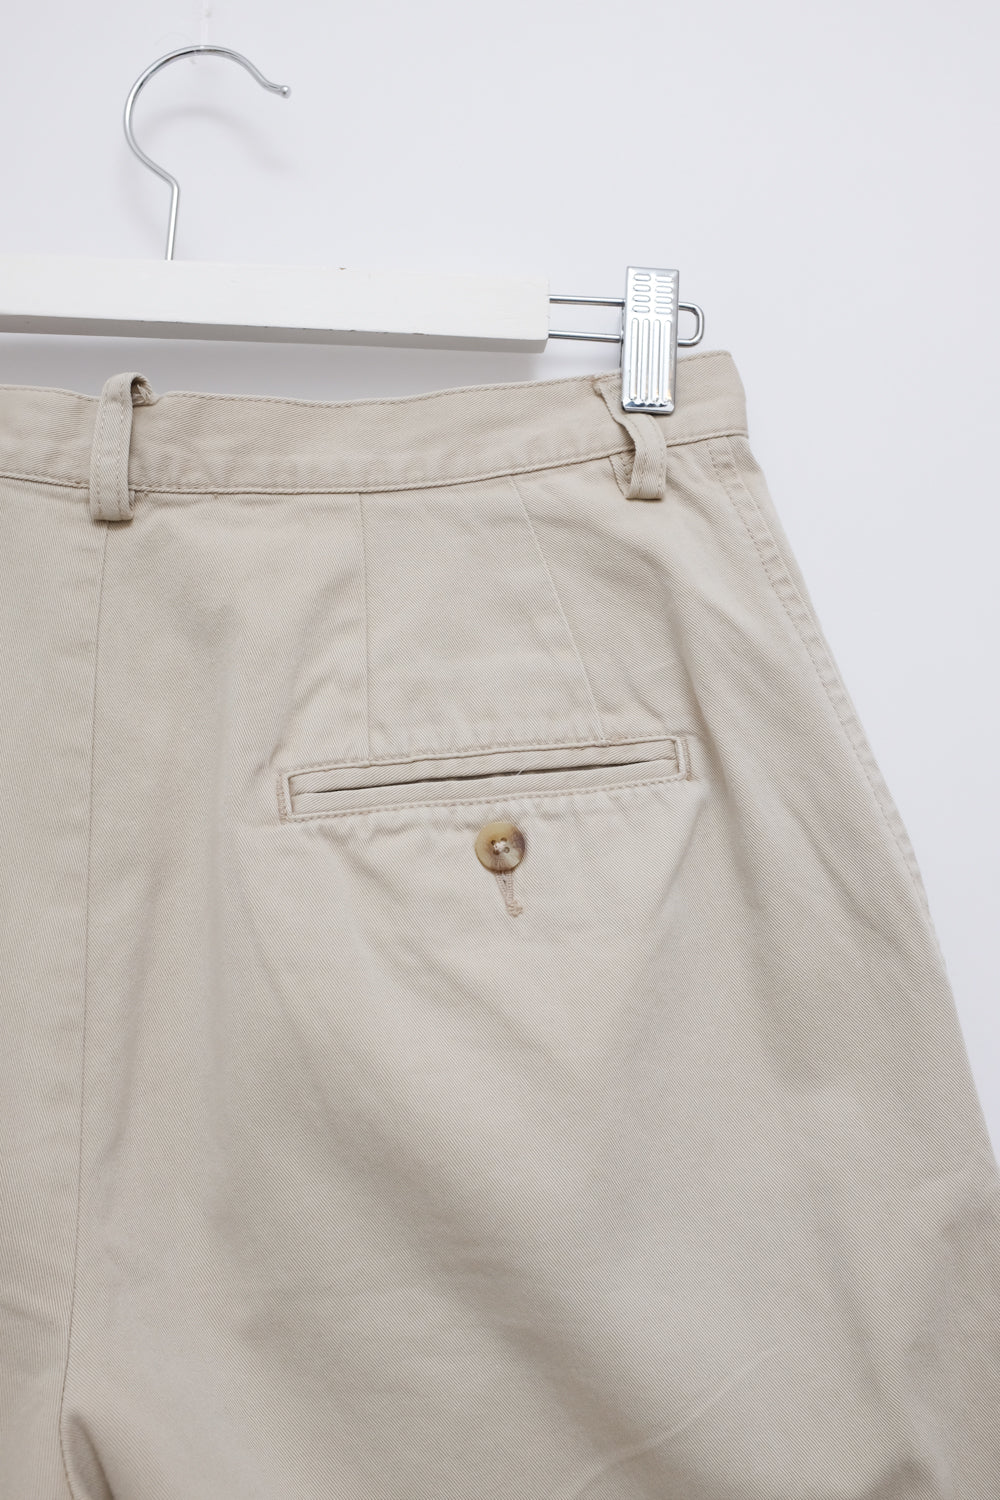 PLEATED PURE COTTON VINTAGE SHORTS